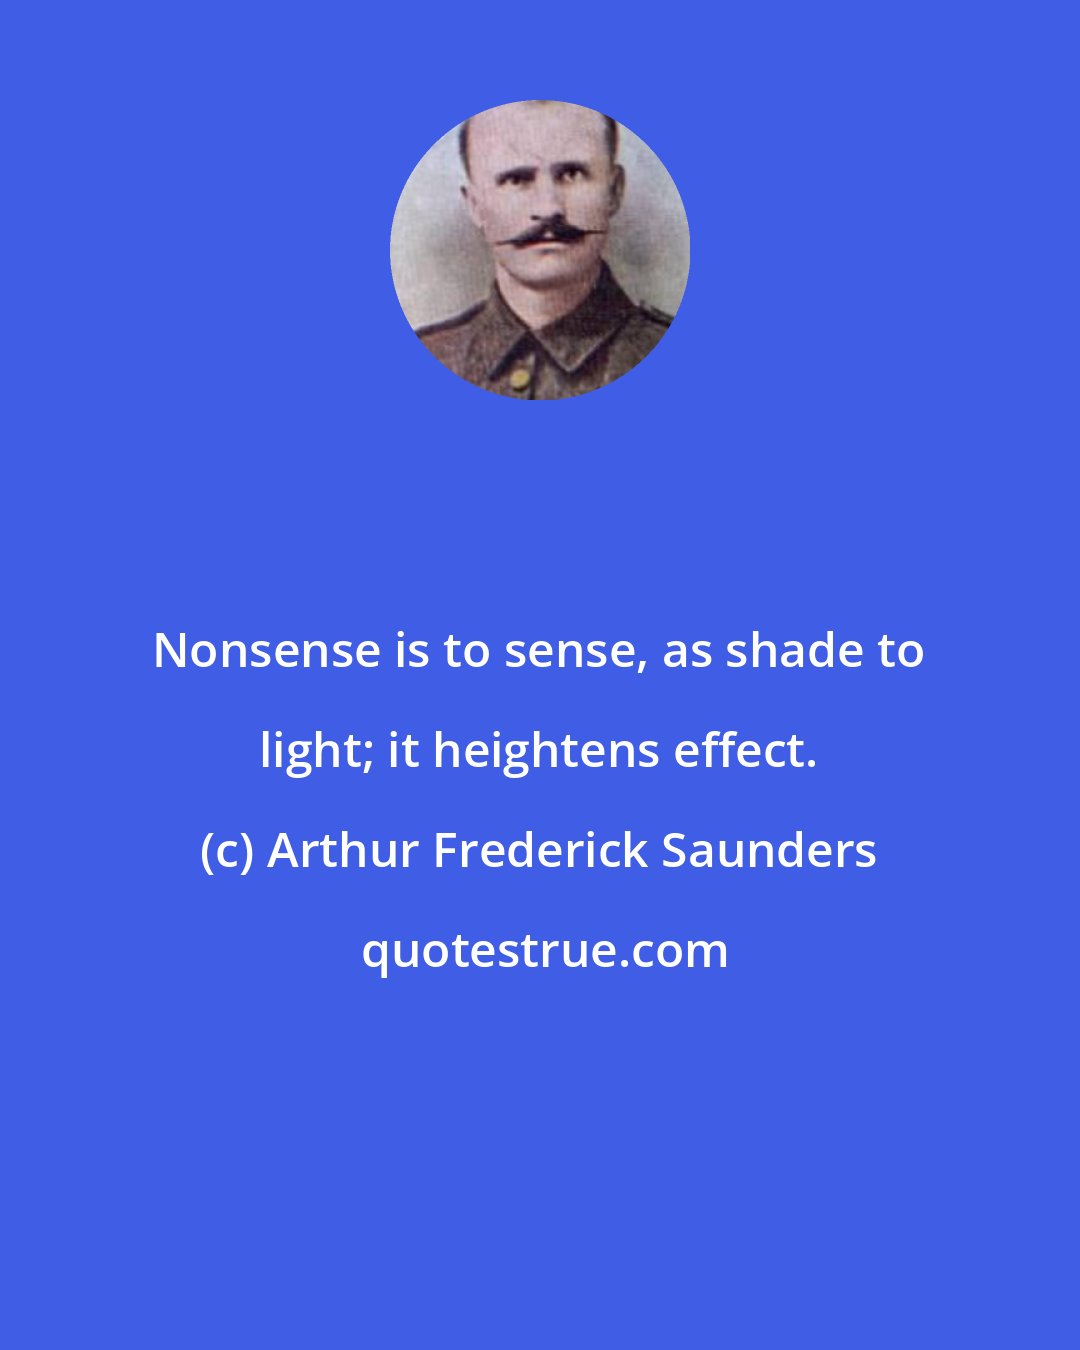 Arthur Frederick Saunders: Nonsense is to sense, as shade to light; it heightens effect.